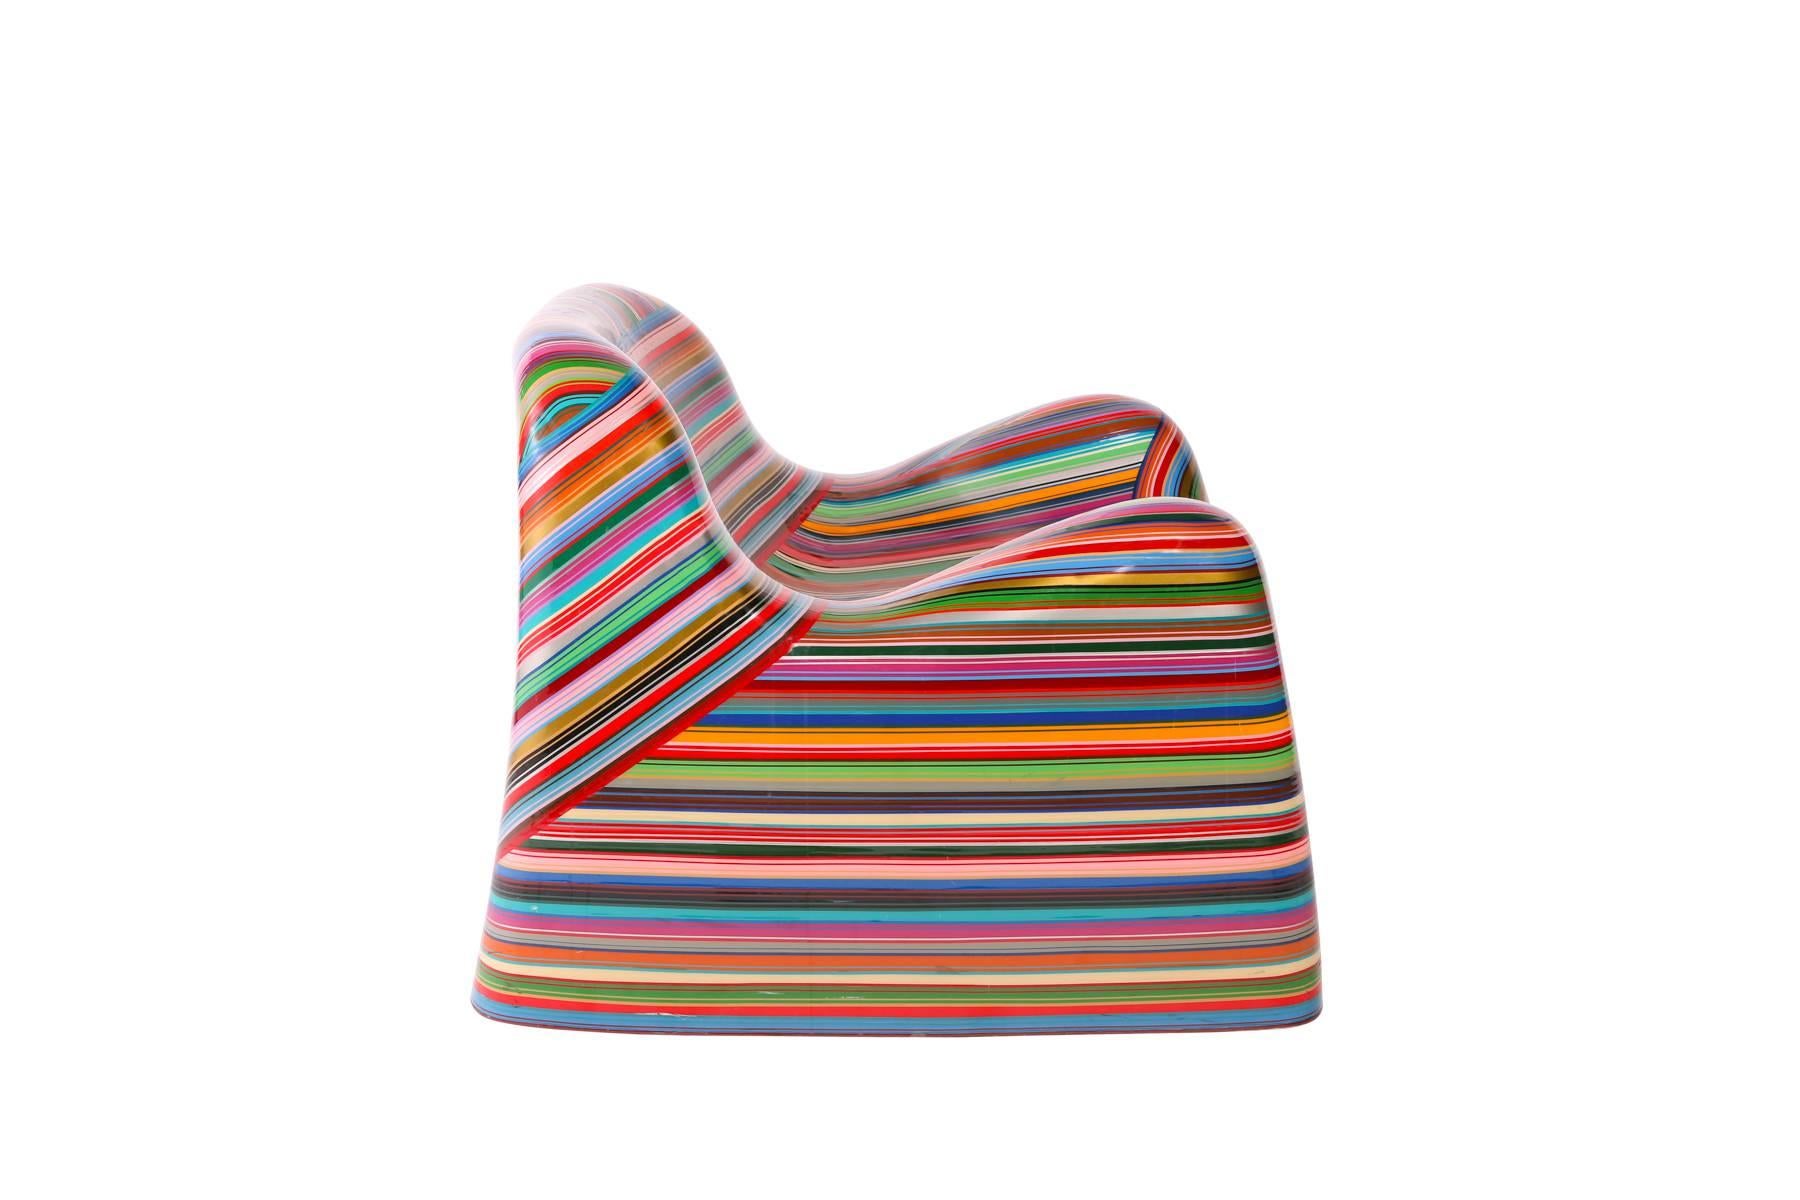 Resin Mauro Oliveira 'Hard Candy' Pin Striped Lounge Chair